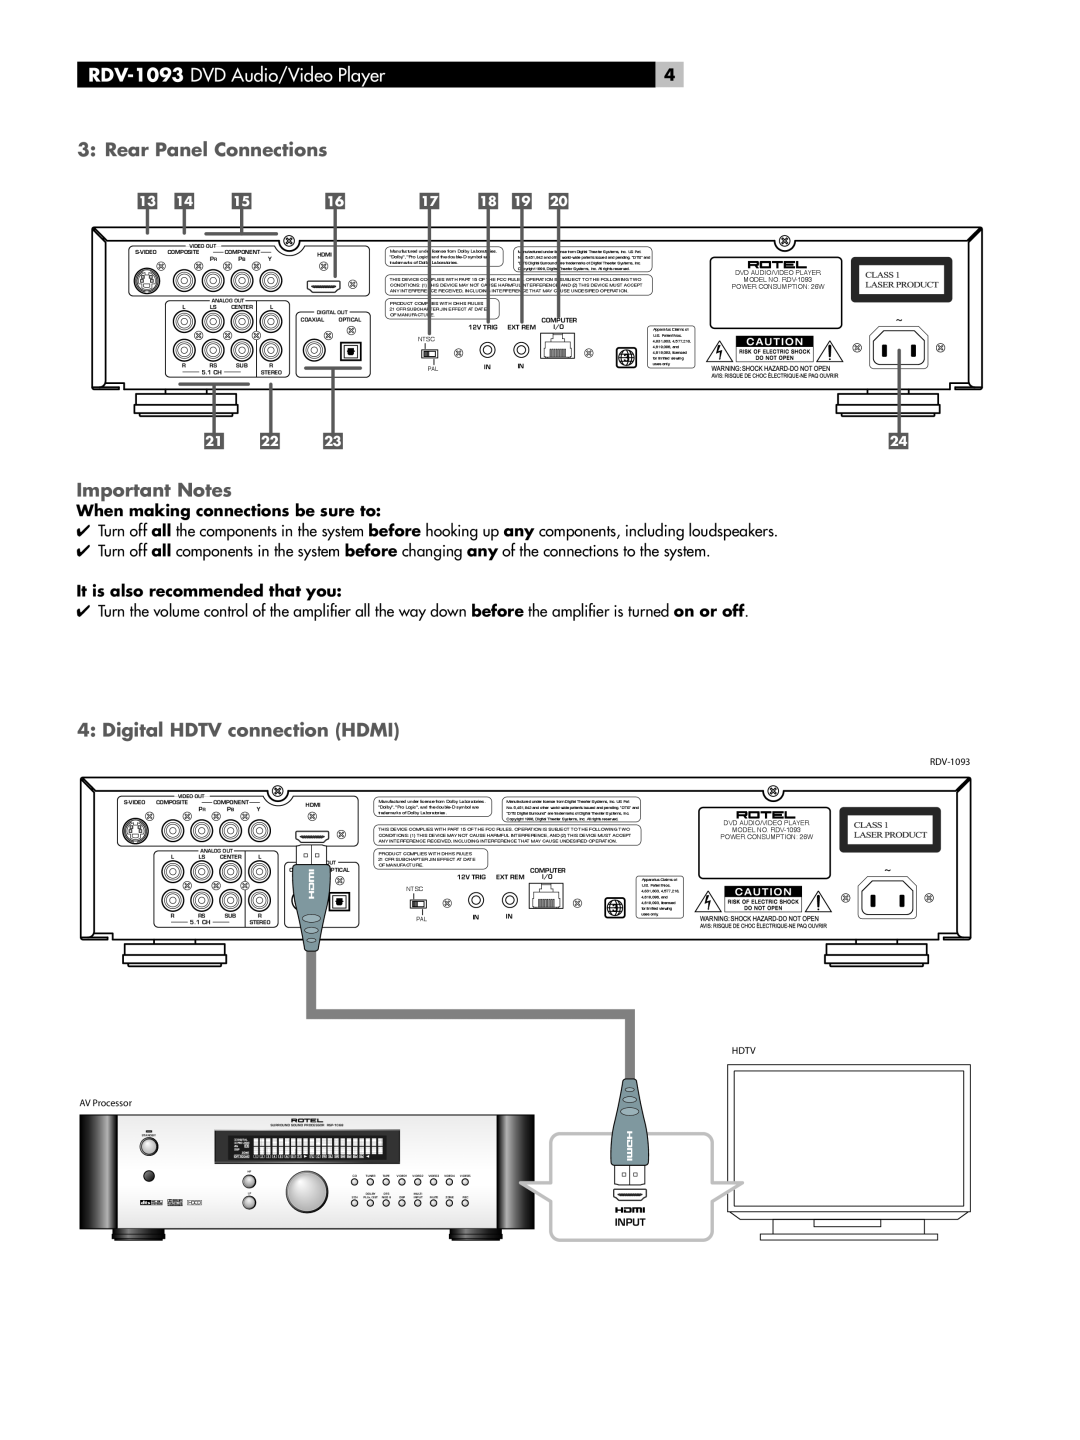 Rotel RDV-1093 DVD Audio/Video Player, Rear Panel Connections, Important Notes, Digital HDTV connection HDMI 